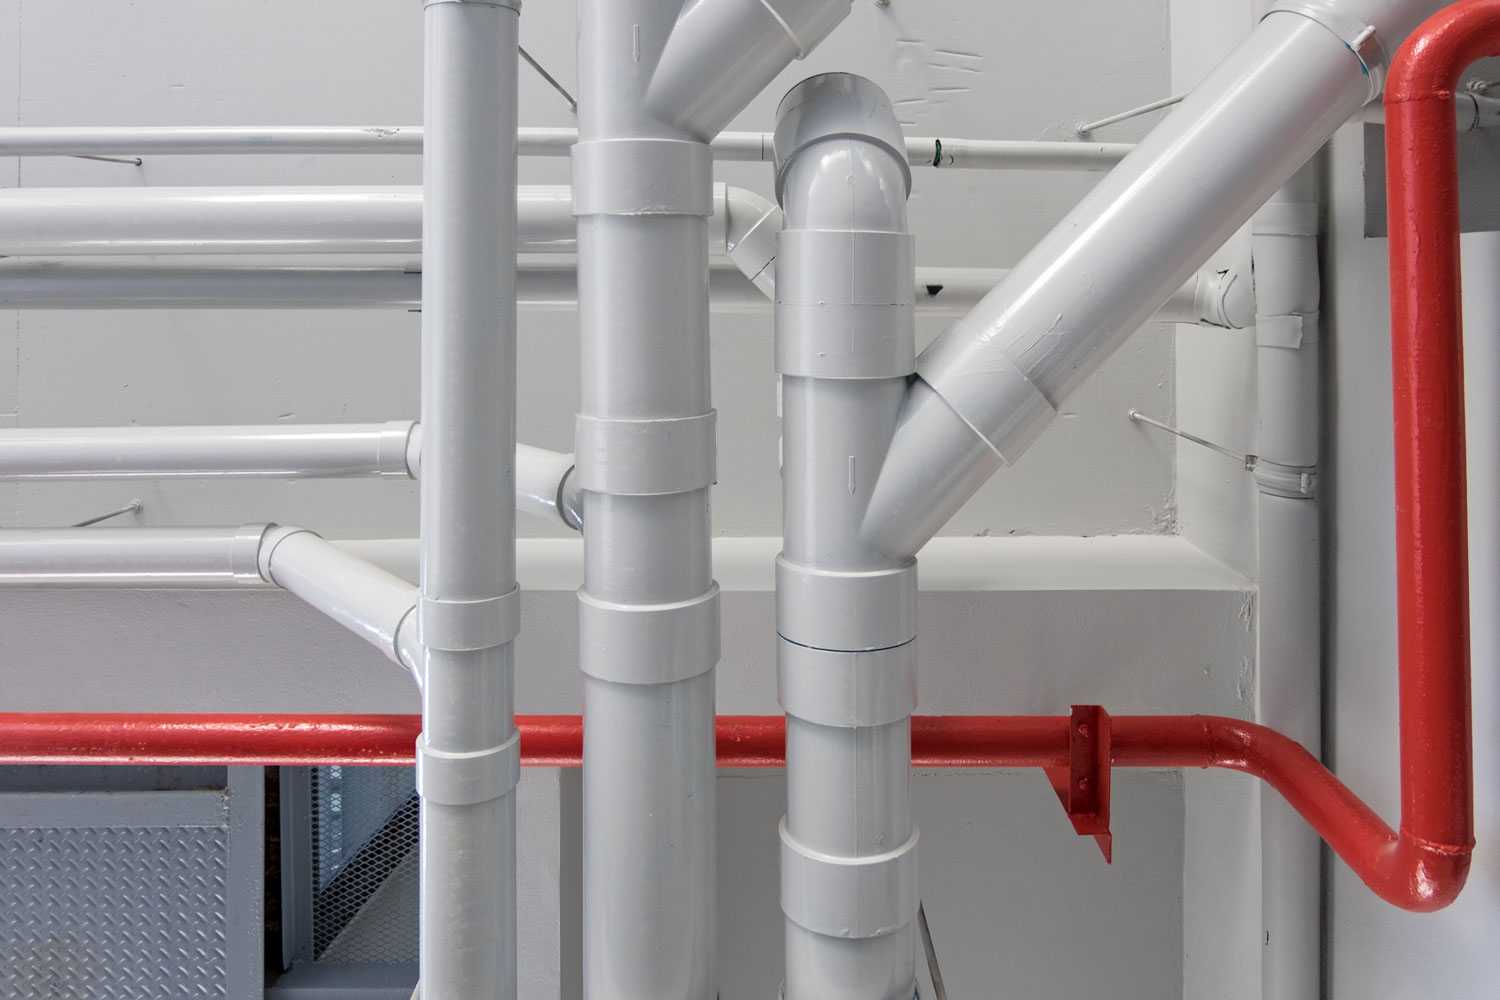 PVC pipes for water lines and waste lines